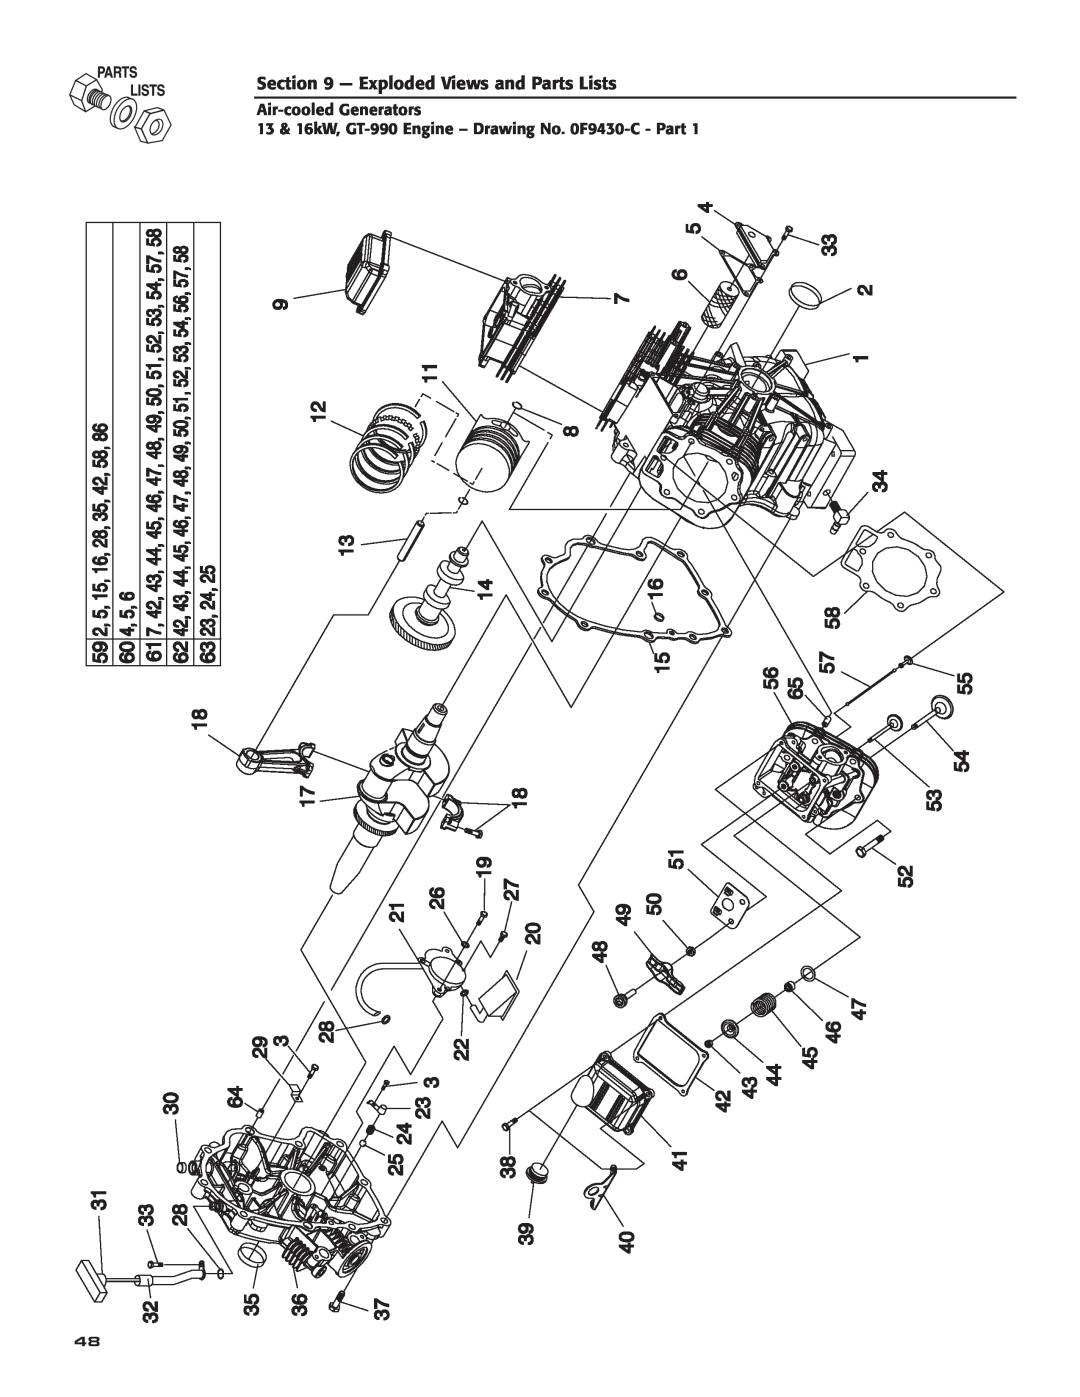 Guardian Technologies 005281, 005282, 005283, 005284, 005280, 005243 Exploded Views and Parts Lists, Air-cooledGenerators 